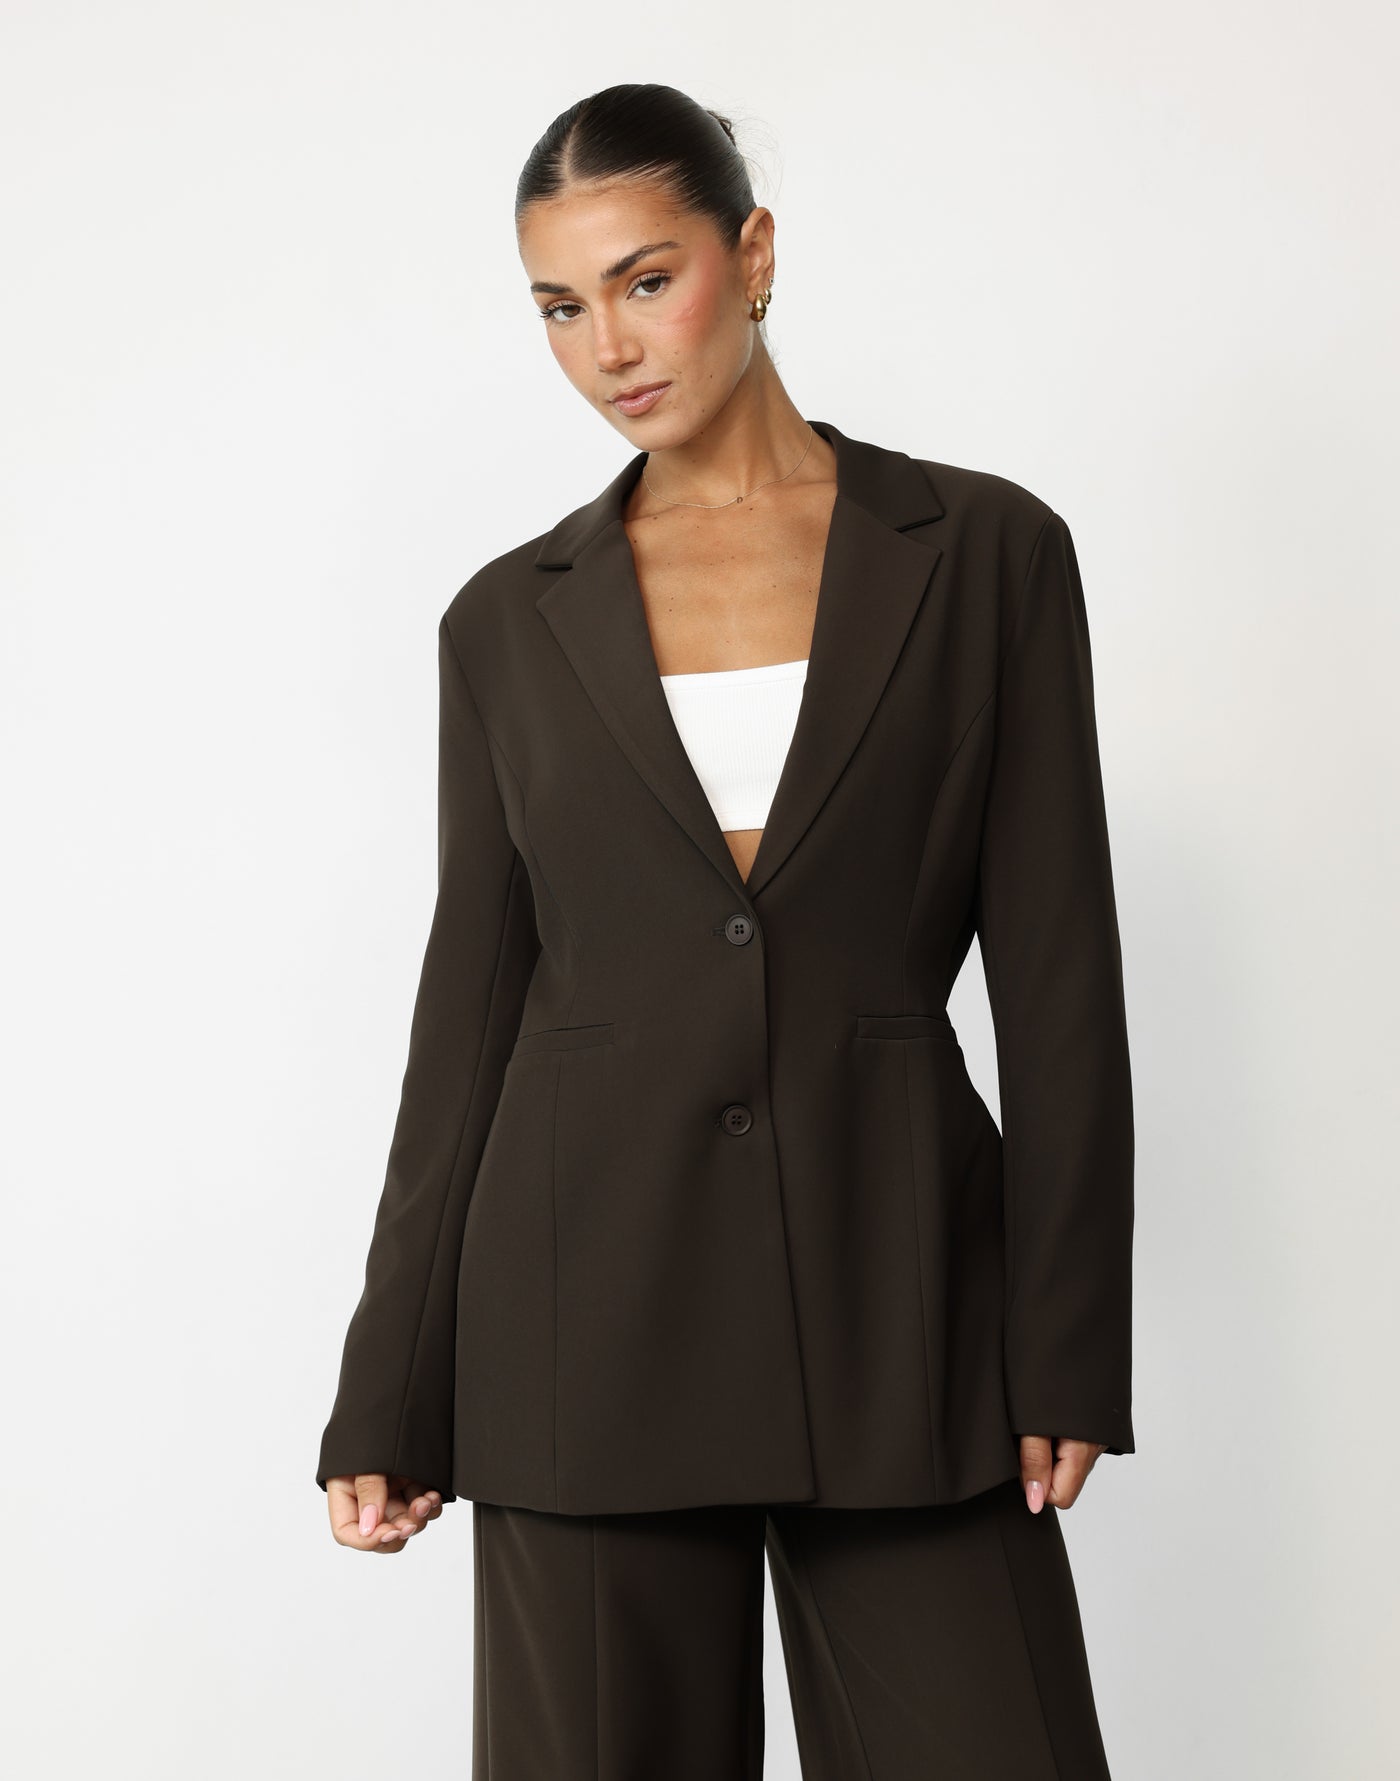 Octavia Blazer (Dark Coffee) | CHARCOAL Exclusive - Oversized Shaped Functional Pocket Blazer - Women's Outerwear - Charcoal Clothing